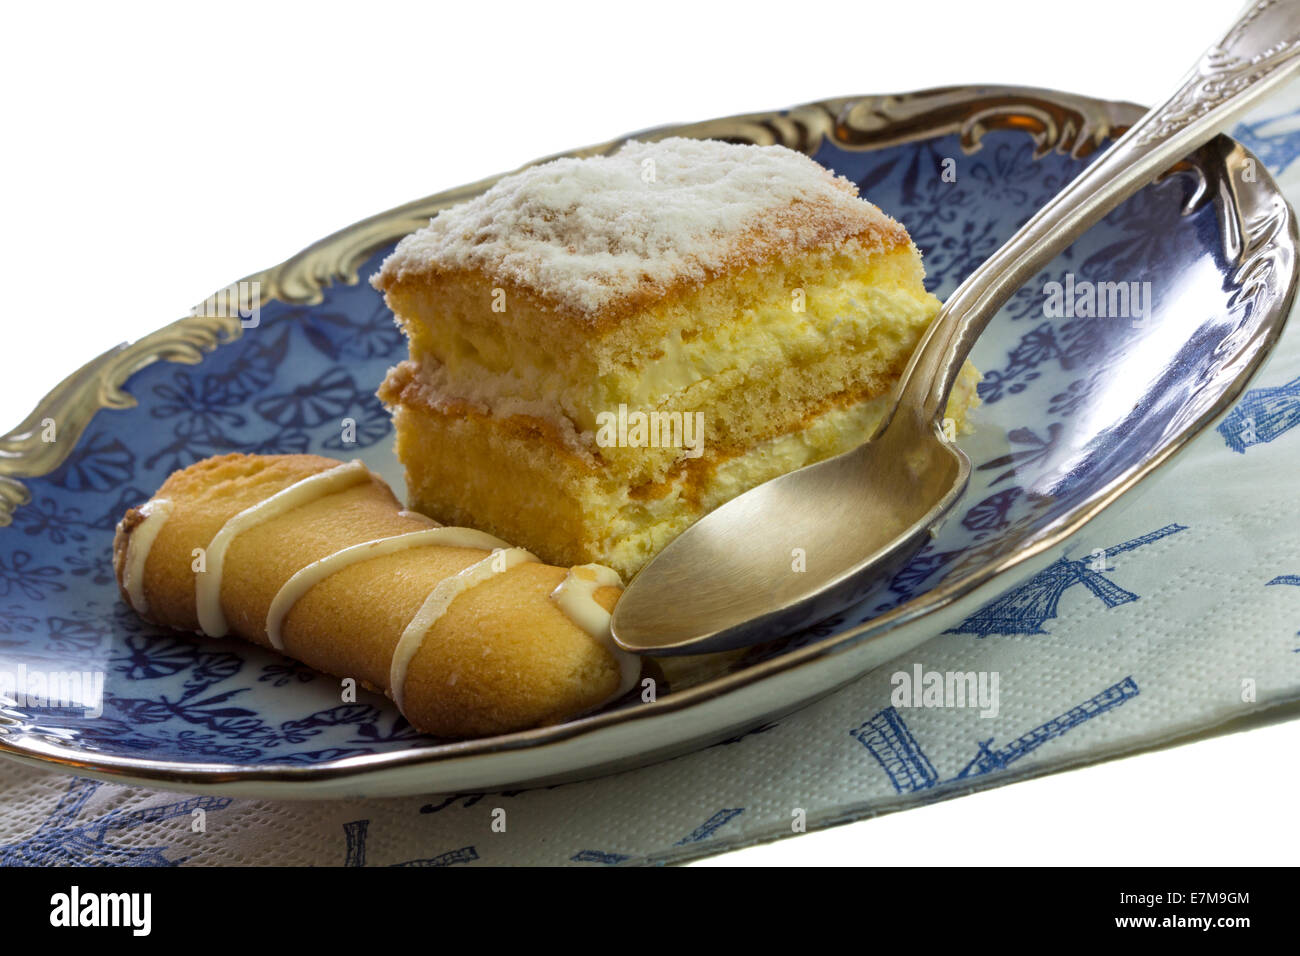 Sweet pastry on plate over white background Stock Photo